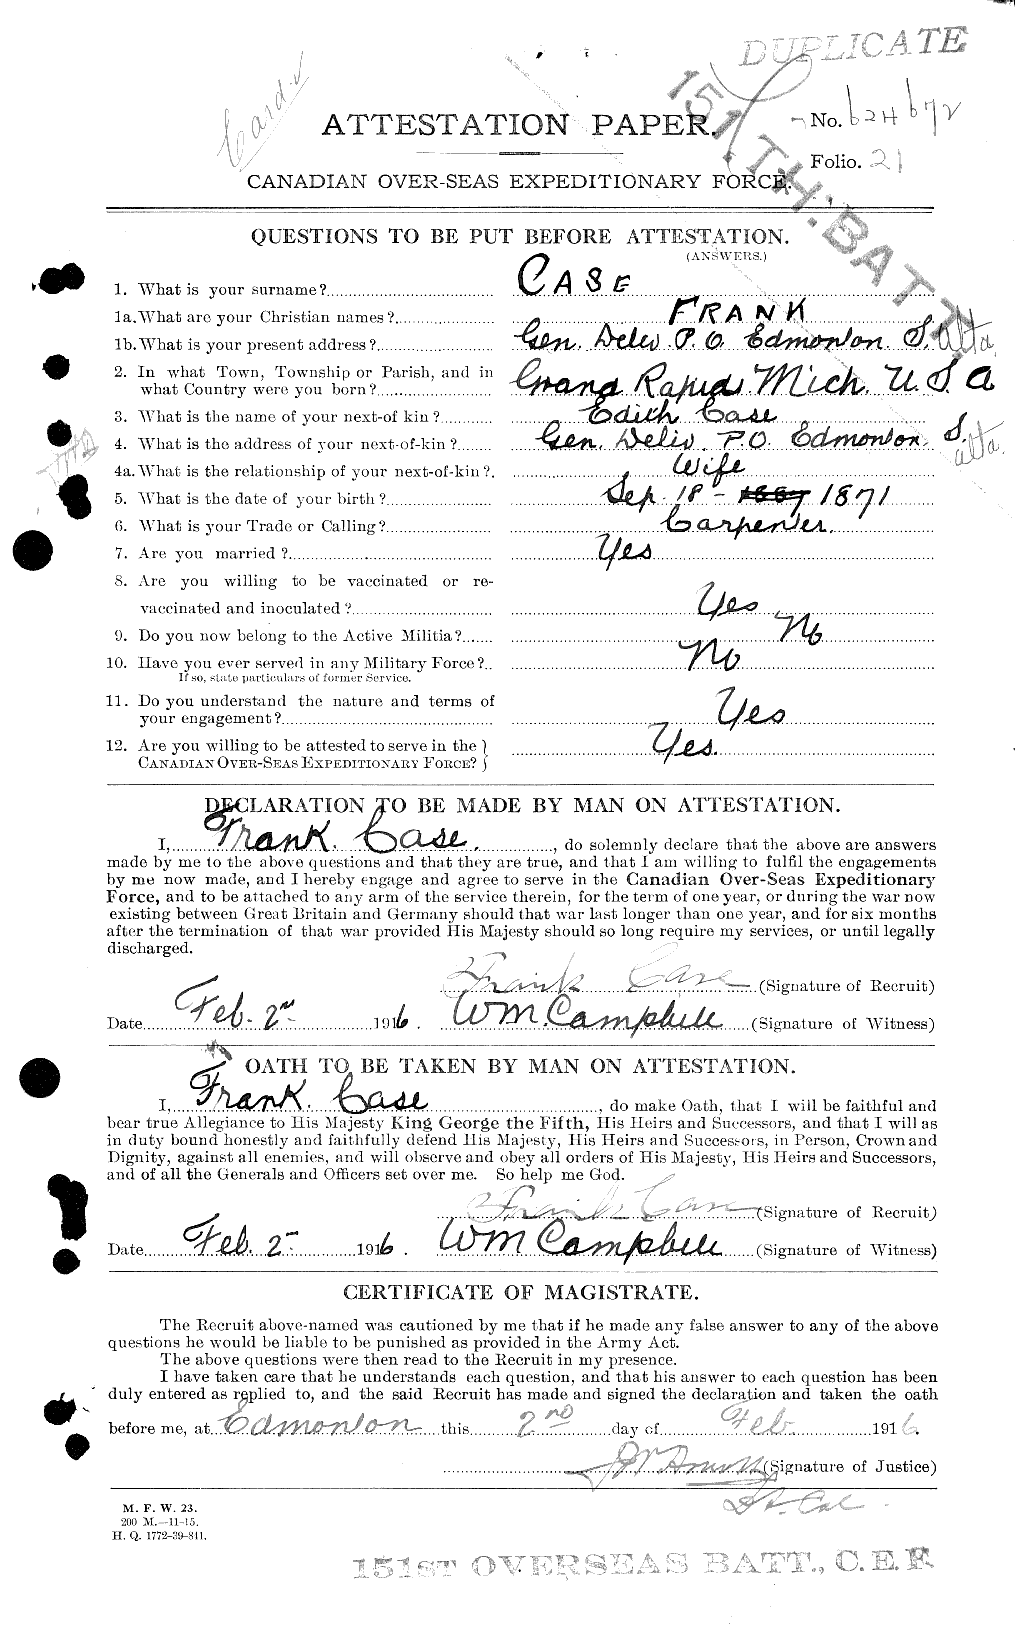 Personnel Records of the First World War - CEF 012698a